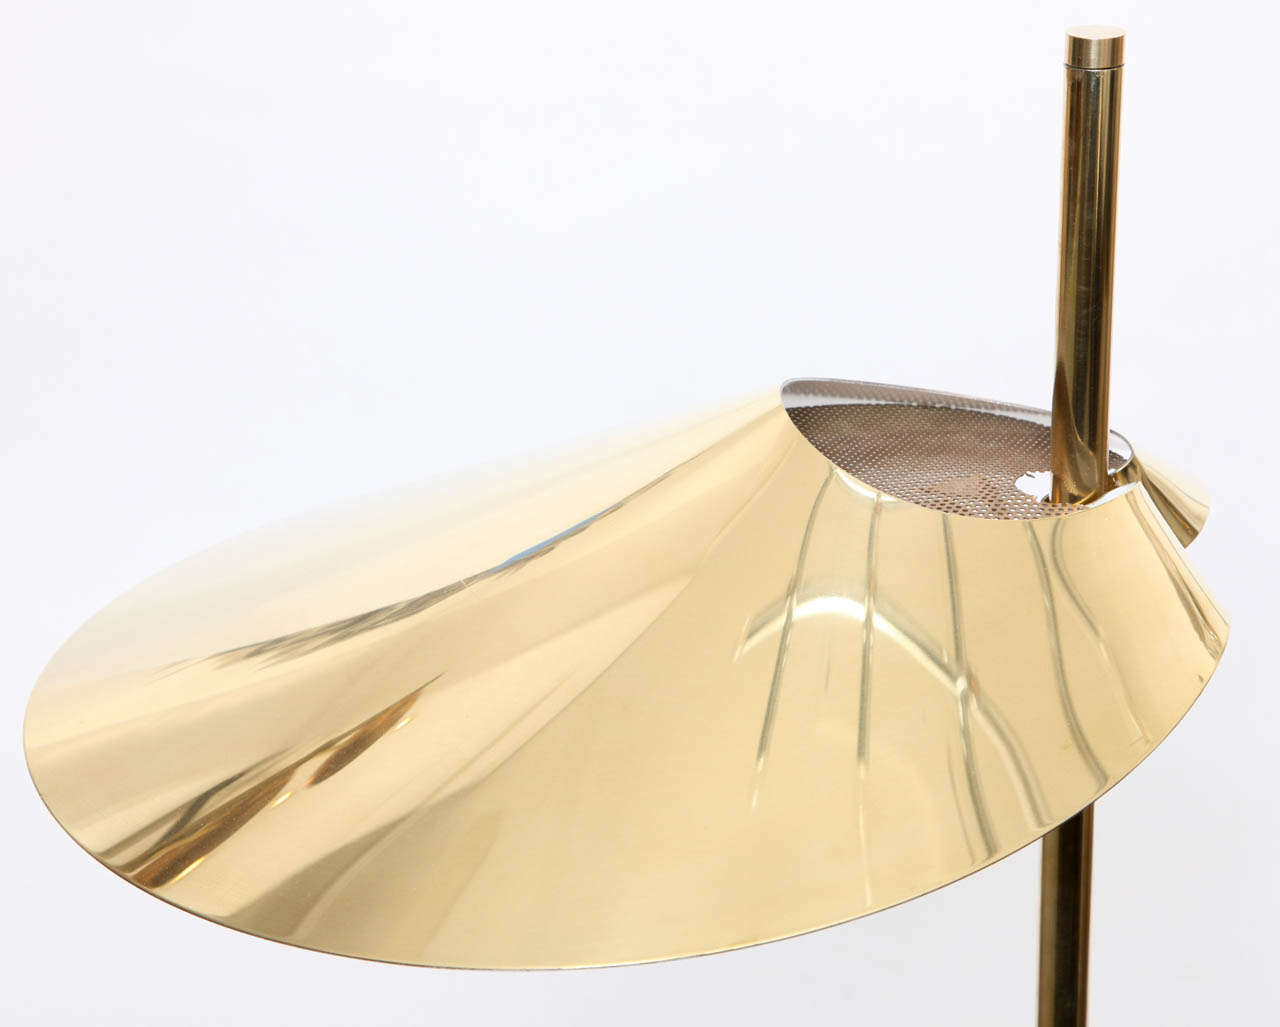 Late 20th Century A Modernist Brass Floor Lamp signed C. Jere 1977